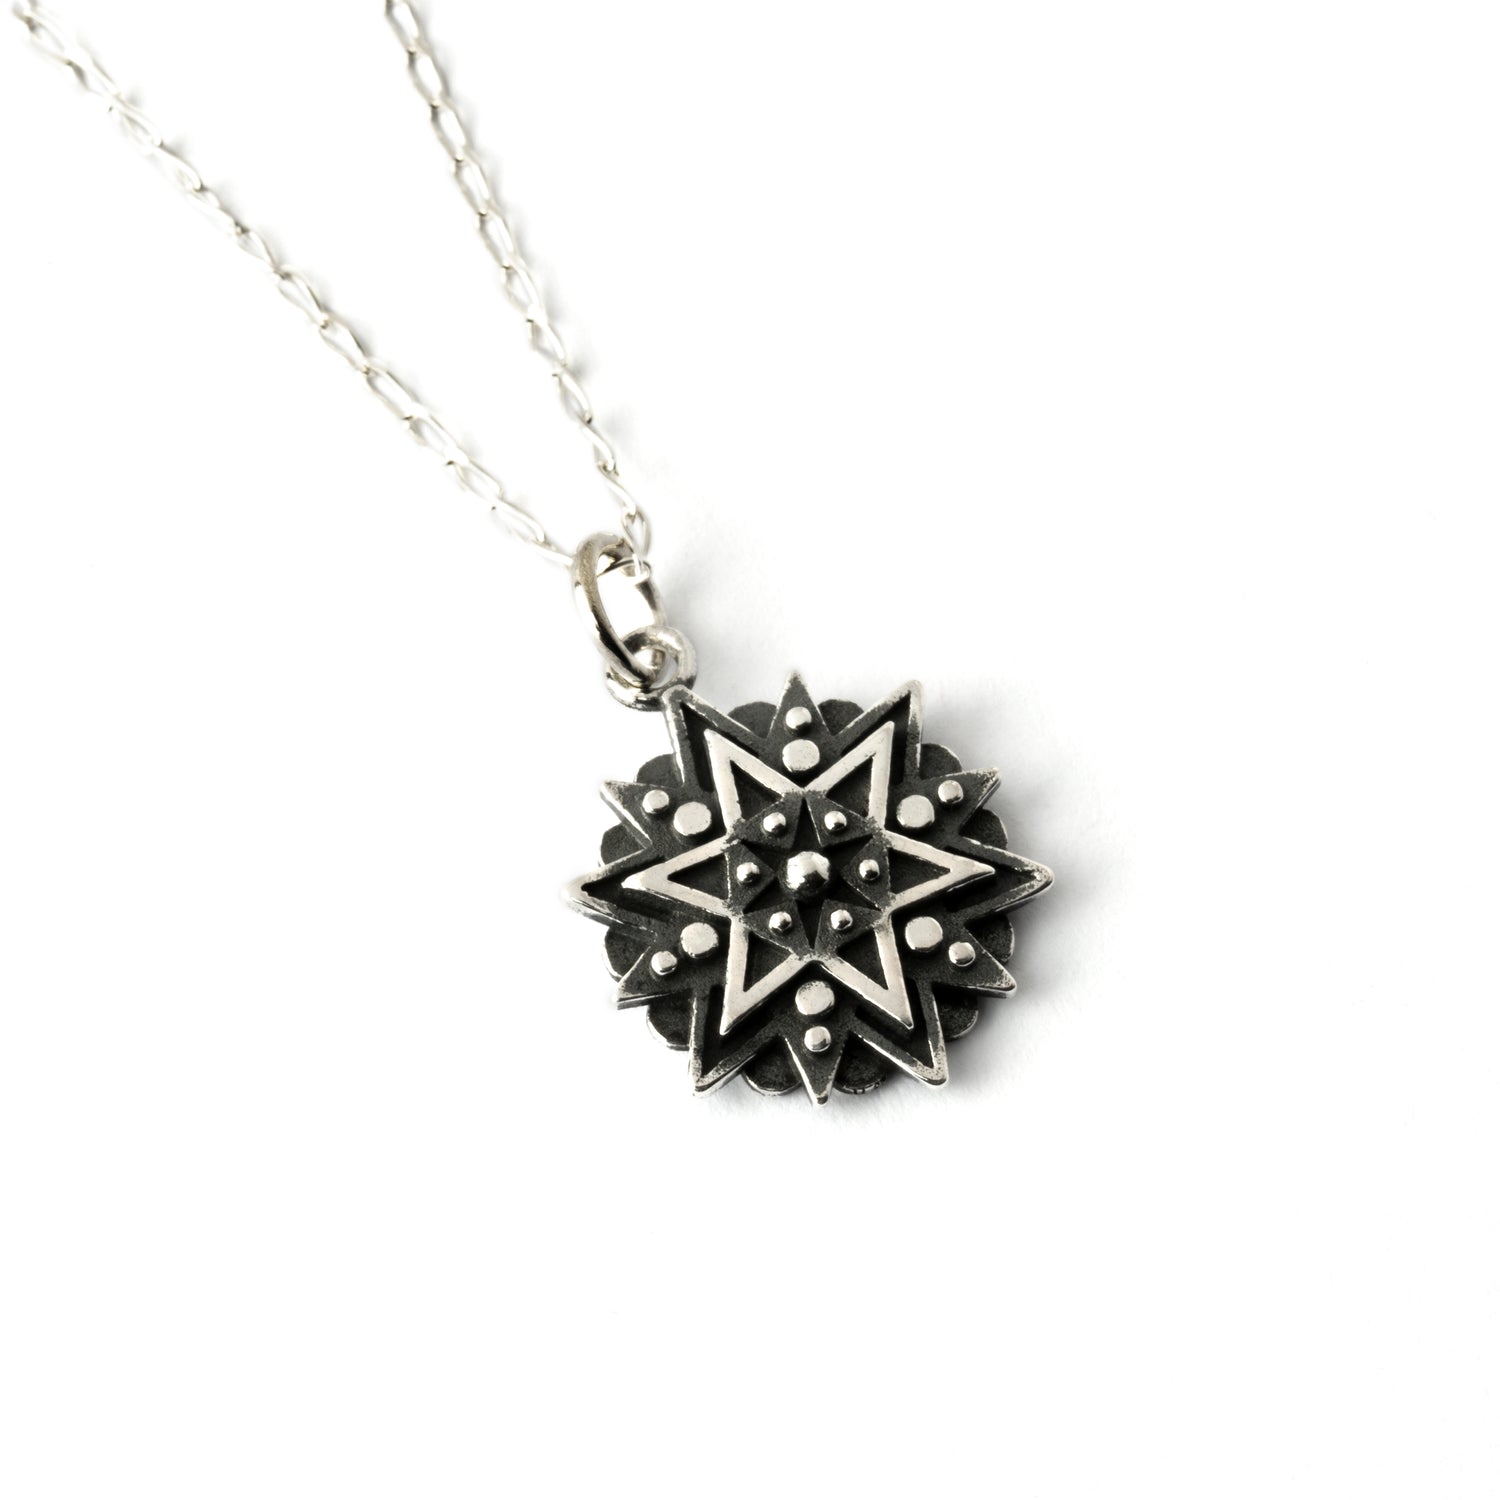 Inspiration Star Charm necklace right side view